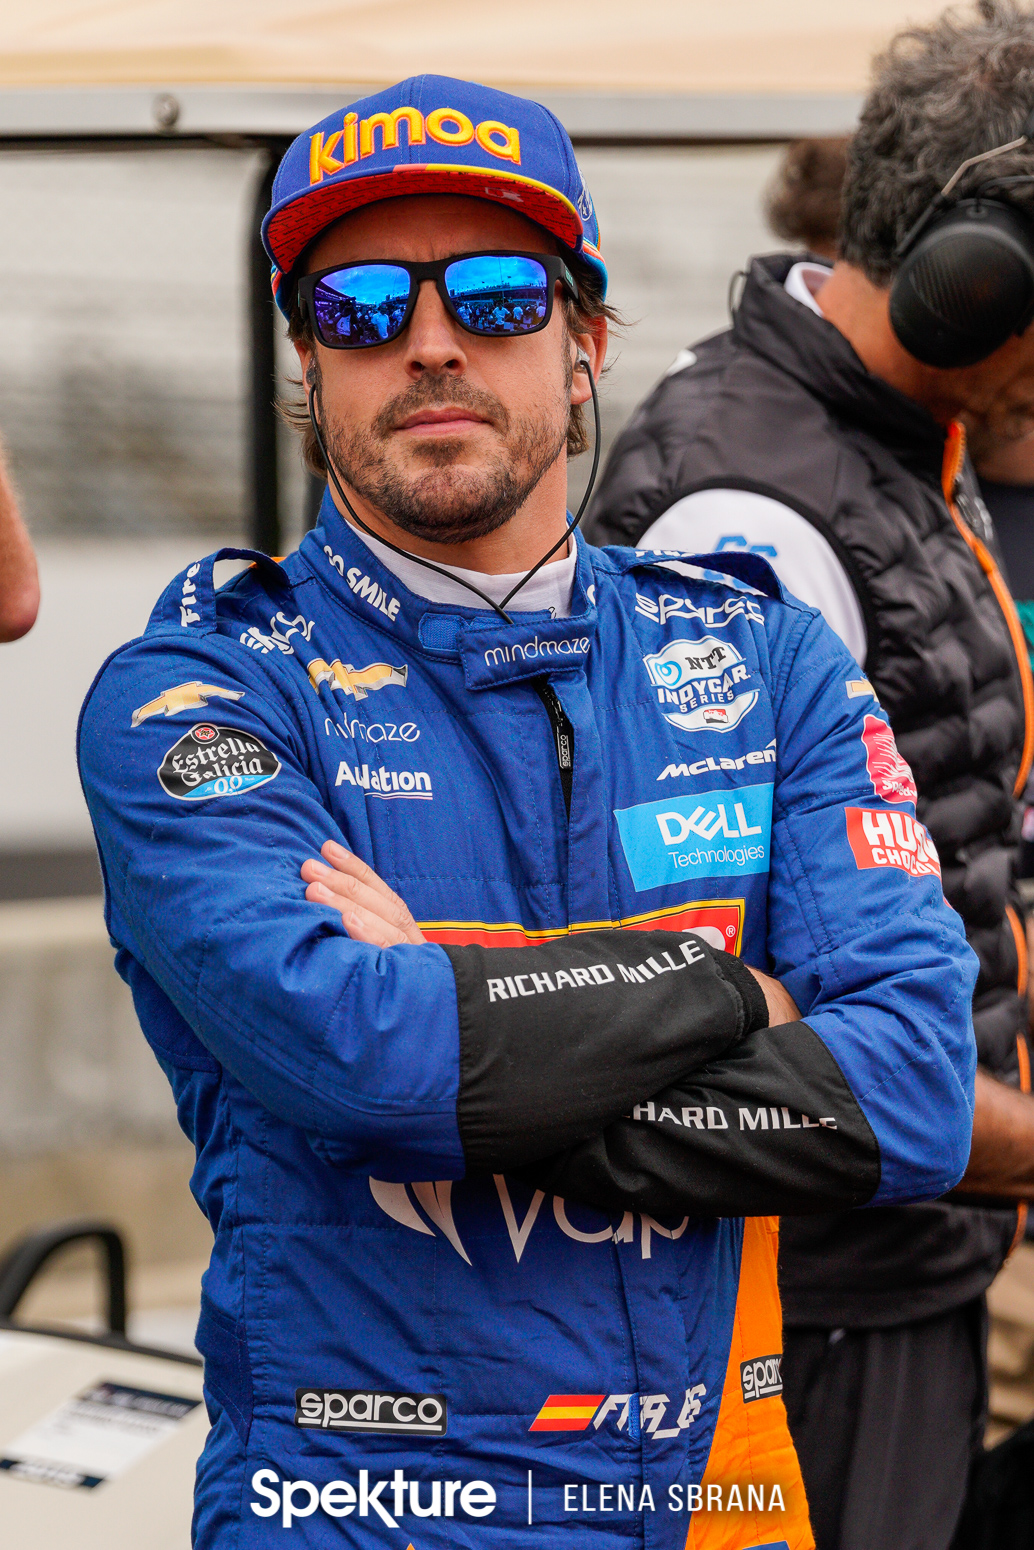 Earchphoto Sports - Fernando Alonso waiting for his turn at the last row shootout